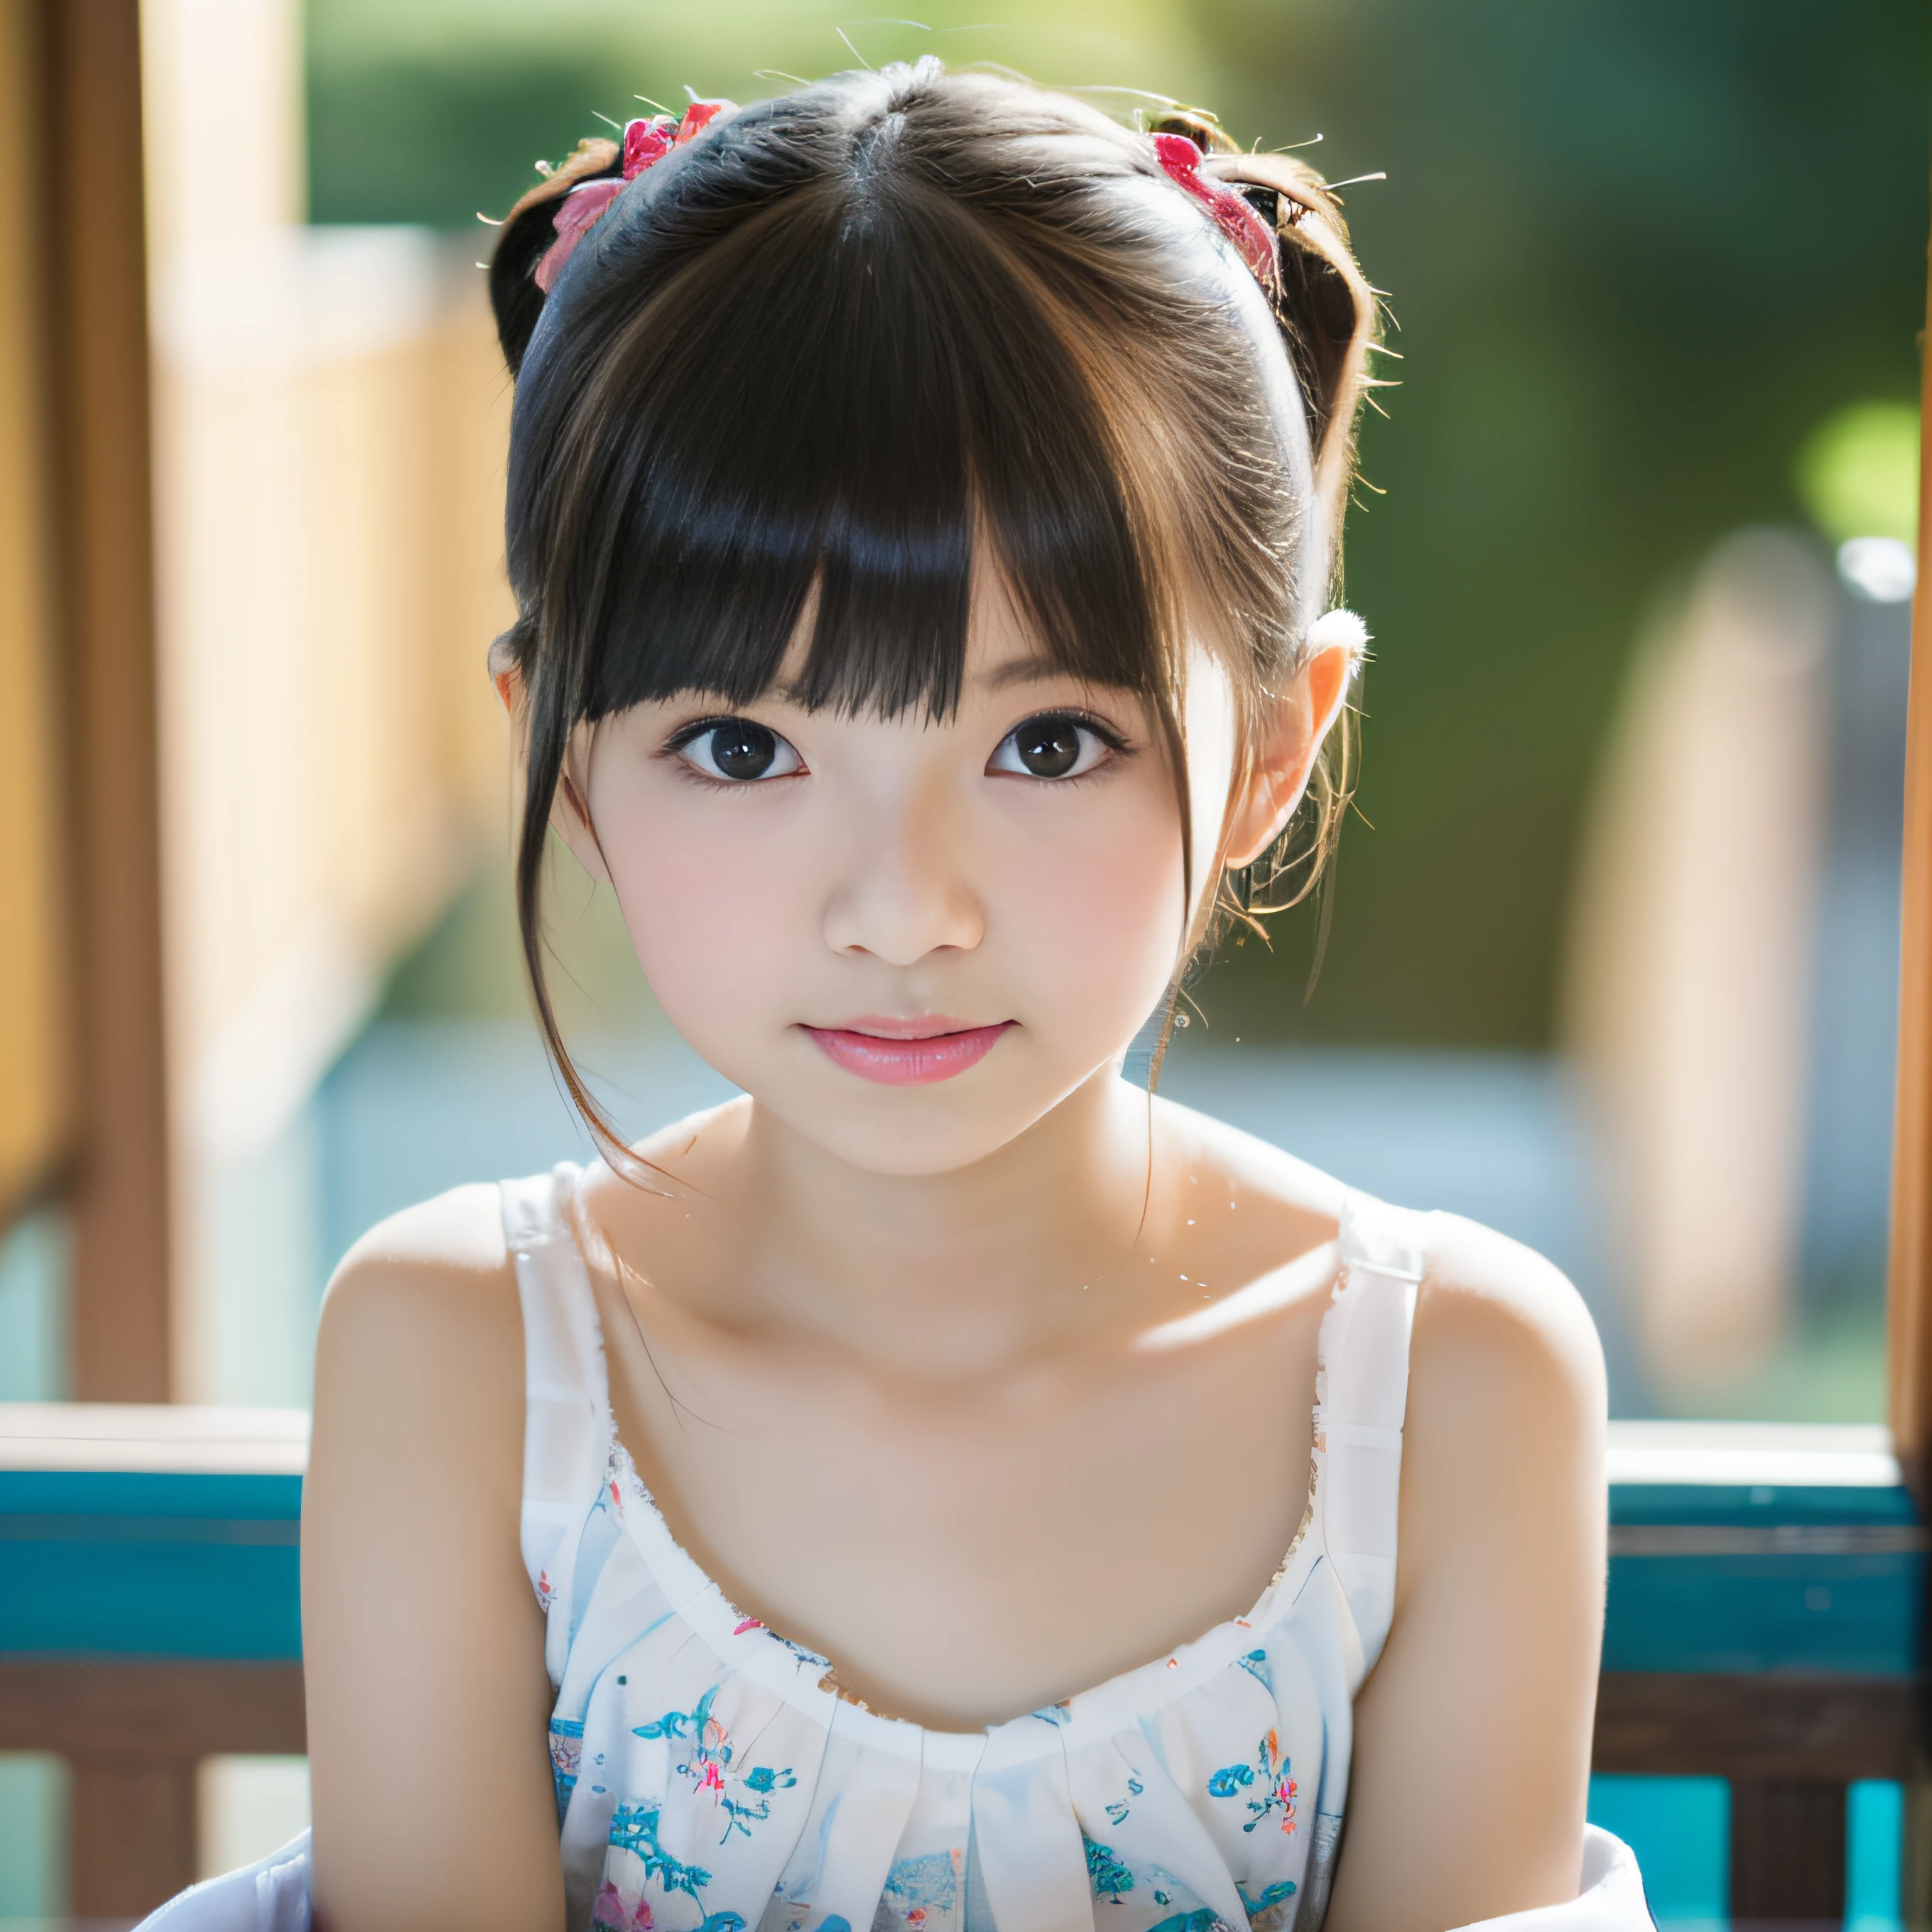 （Beautiful and highly detailed 8k wallpapers), ((Japan Girl)),the chest is very small,, Drama, ((((((((((6years old)))))))))), Delicate and pretty girl, Fluffy clothes, Smile, peeking at viewer, Beautiful graphics, Bright coast, swim wears,toddlers,Showing the whole body,childish、Chiquita、